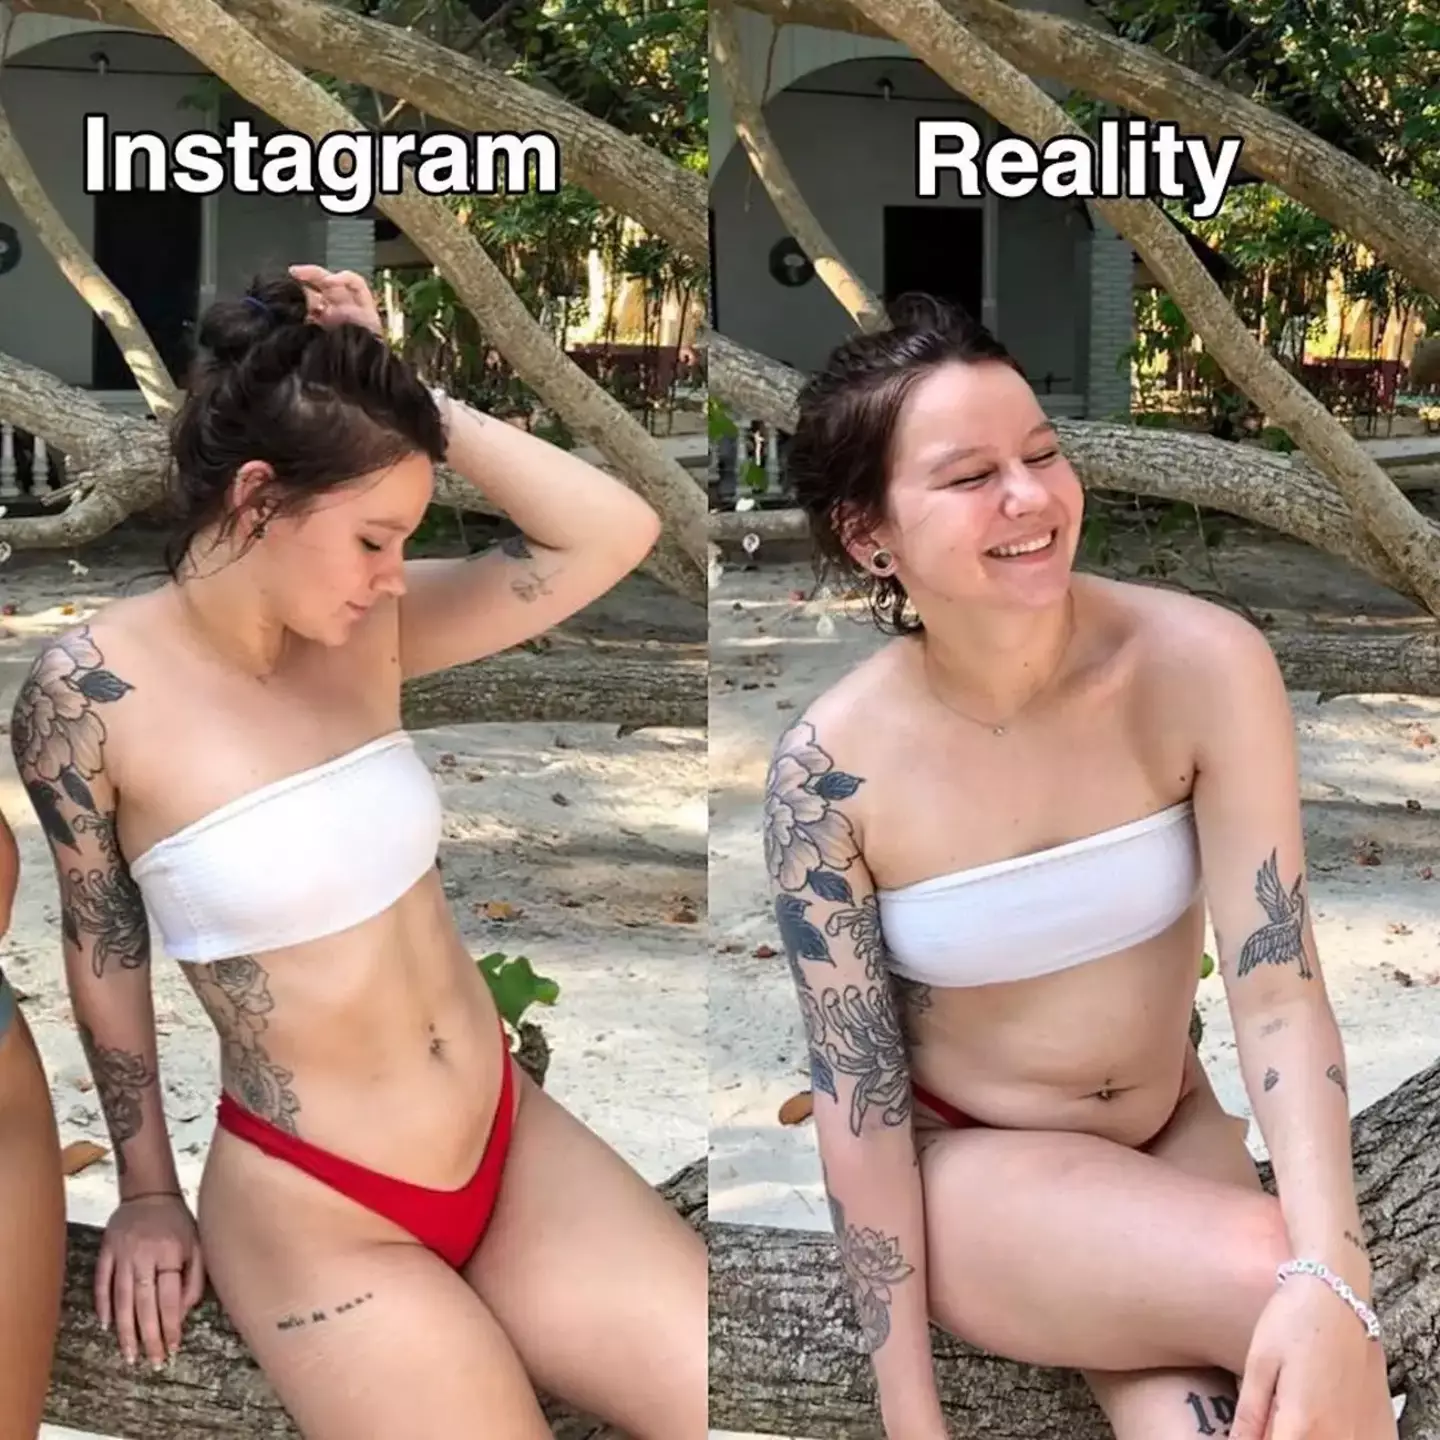 Sara is here to expose the truth behind picture-perfect Instagram photos.